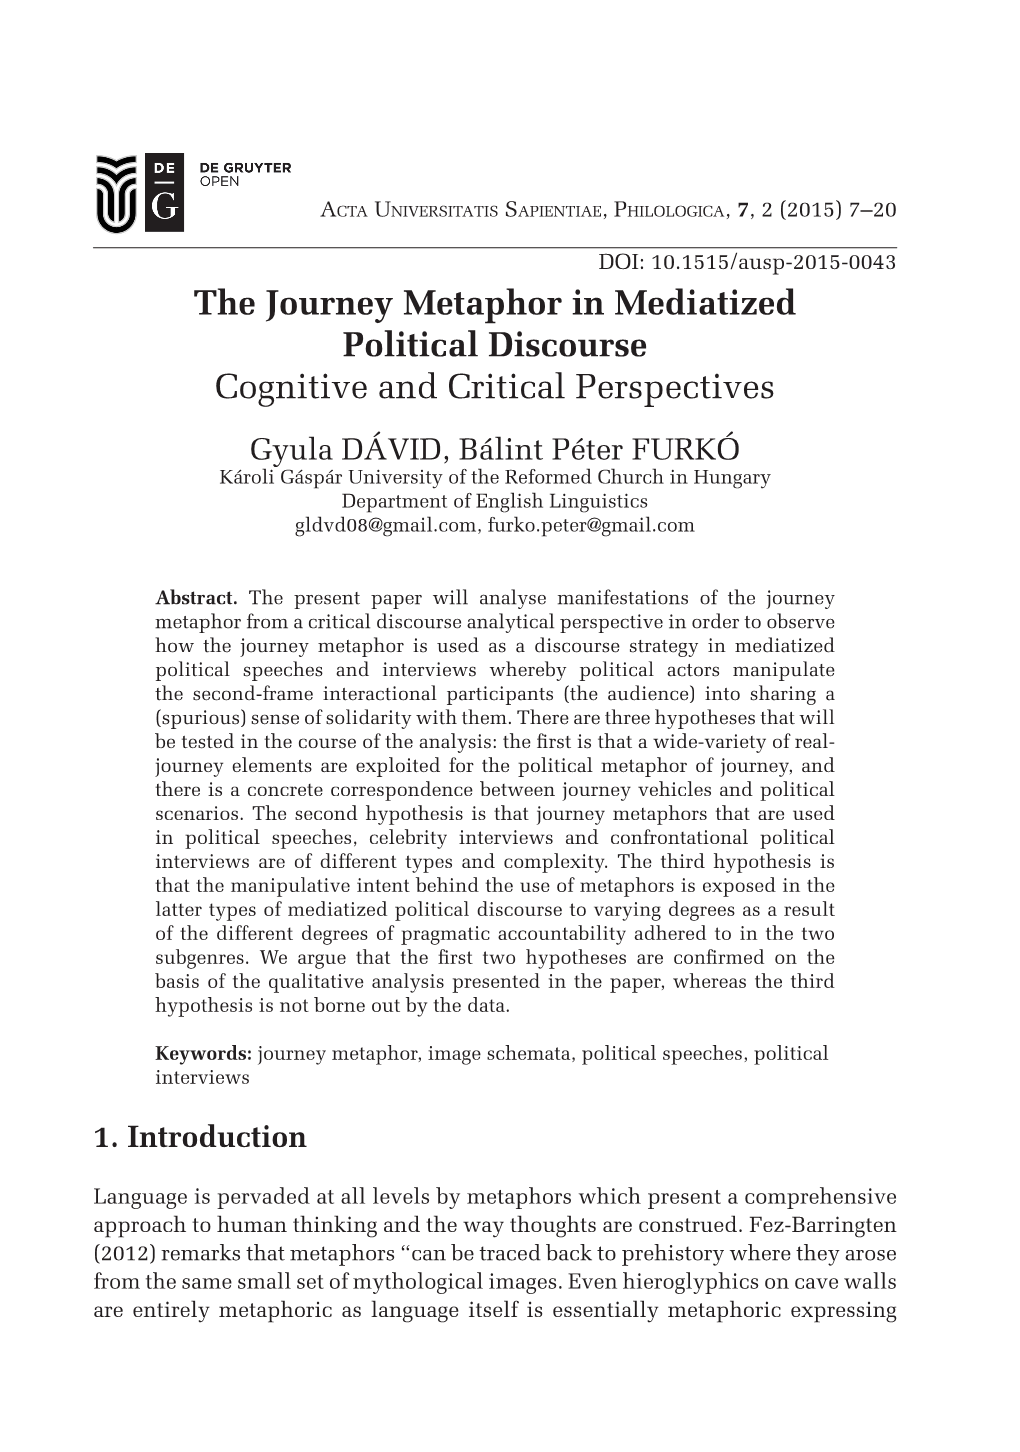 The Journey Metaphor in Mediatized Political Discourse Cognitive And